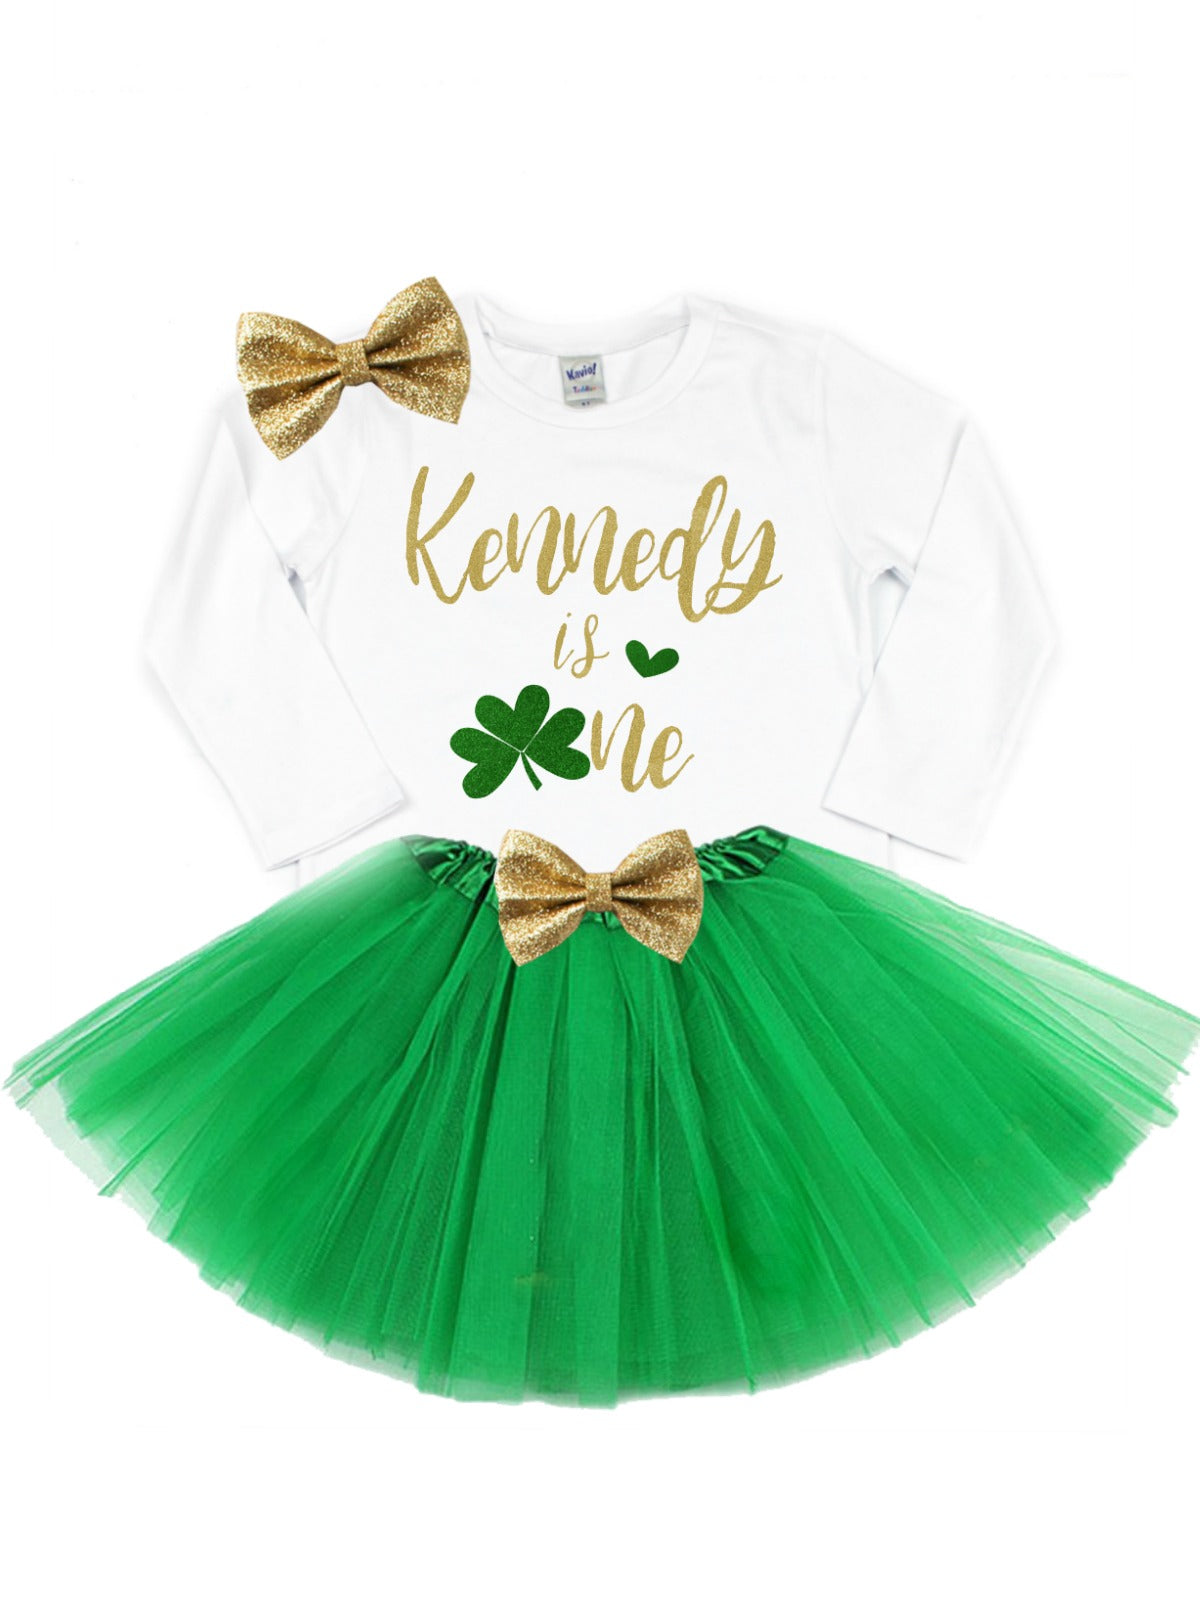 girls first birthday march tutu outfit for st patricks day 